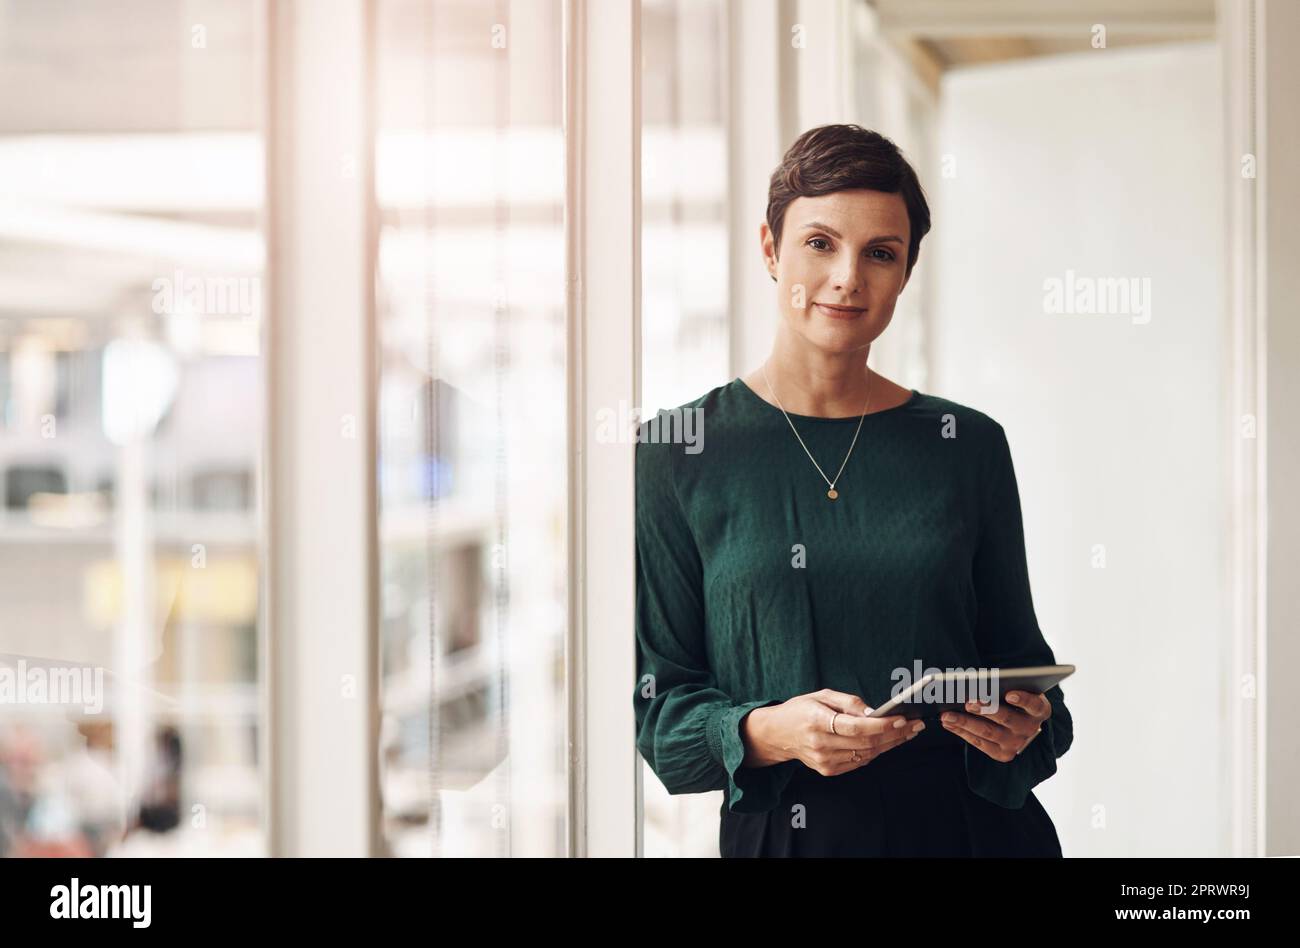 Technology is a businesswomans best friend. Cropped portrait of an attractive young businesswoman using her tablet while standing in the office. Stock Photo